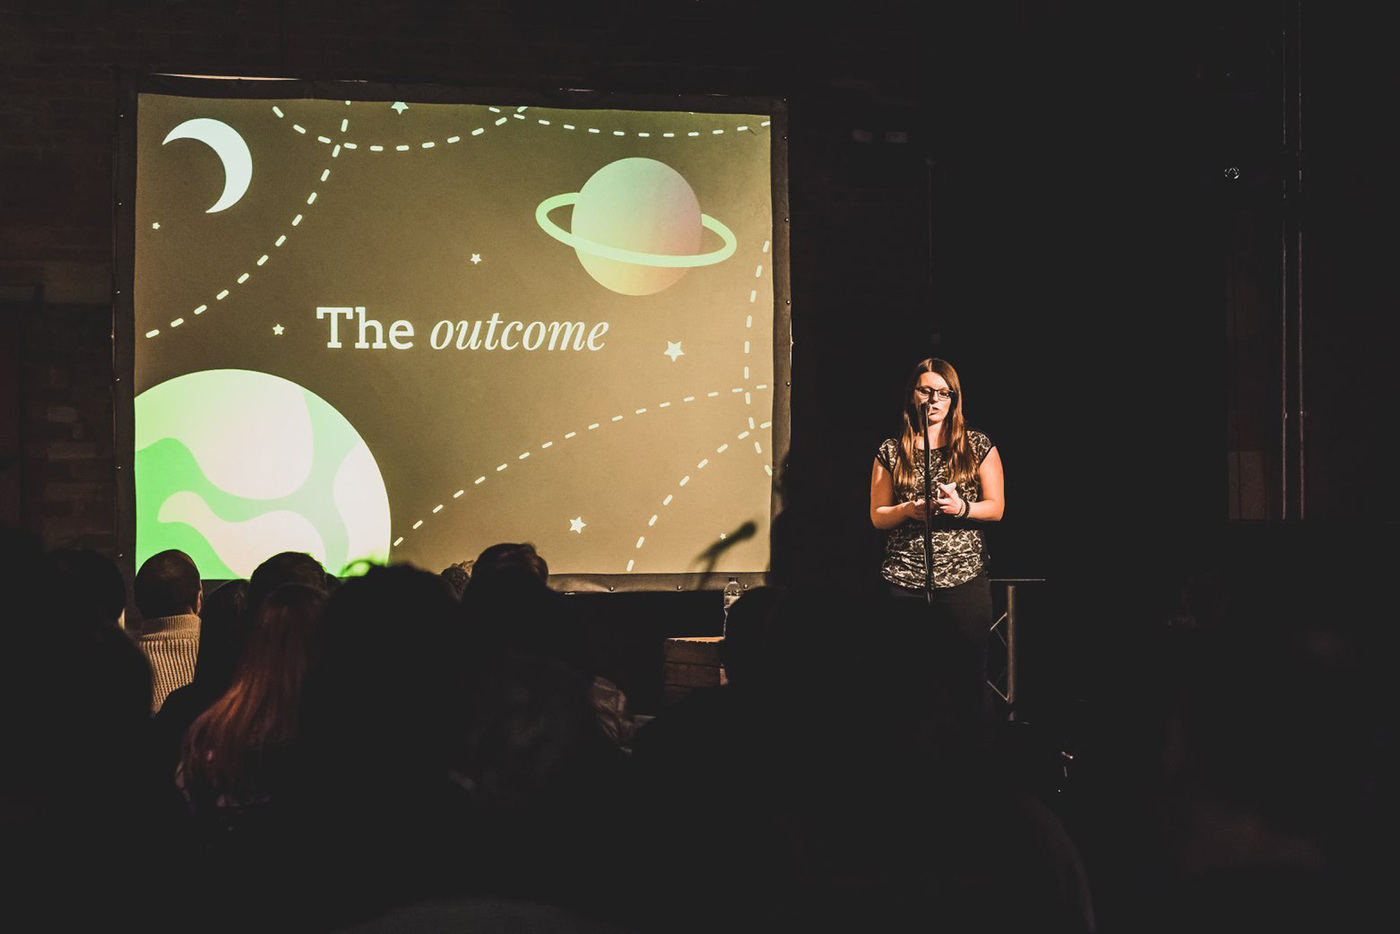 Christine on stage with a microphone and a projector screen on the left. The projector screen shows a slide saying 'The outcome', accompanied with illustrations of planets and stars. 